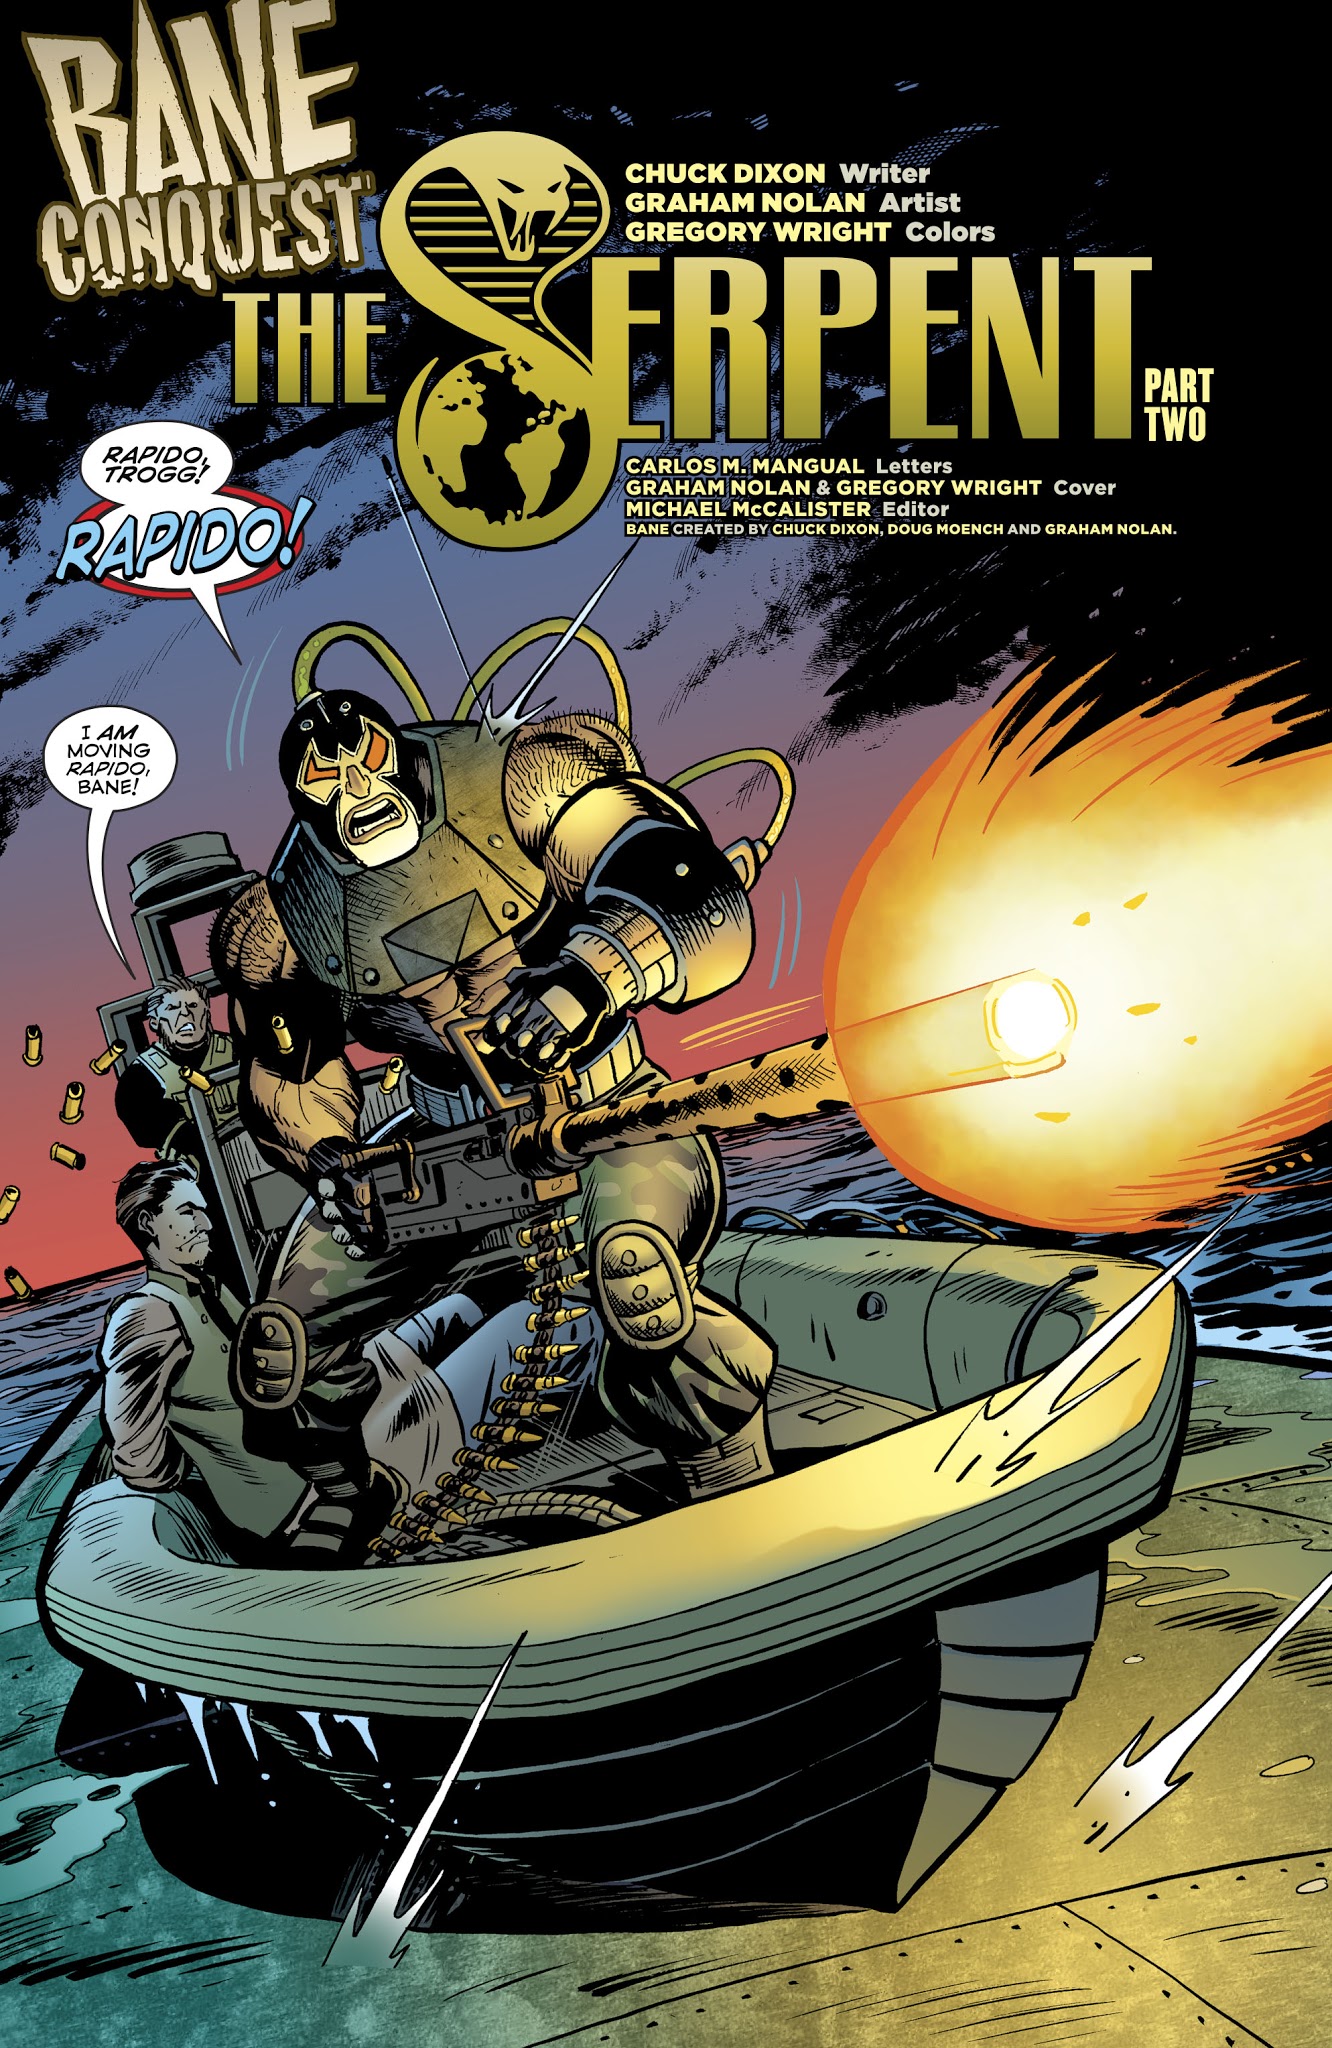 Read online Bane: Conquest comic -  Issue #7 - 3